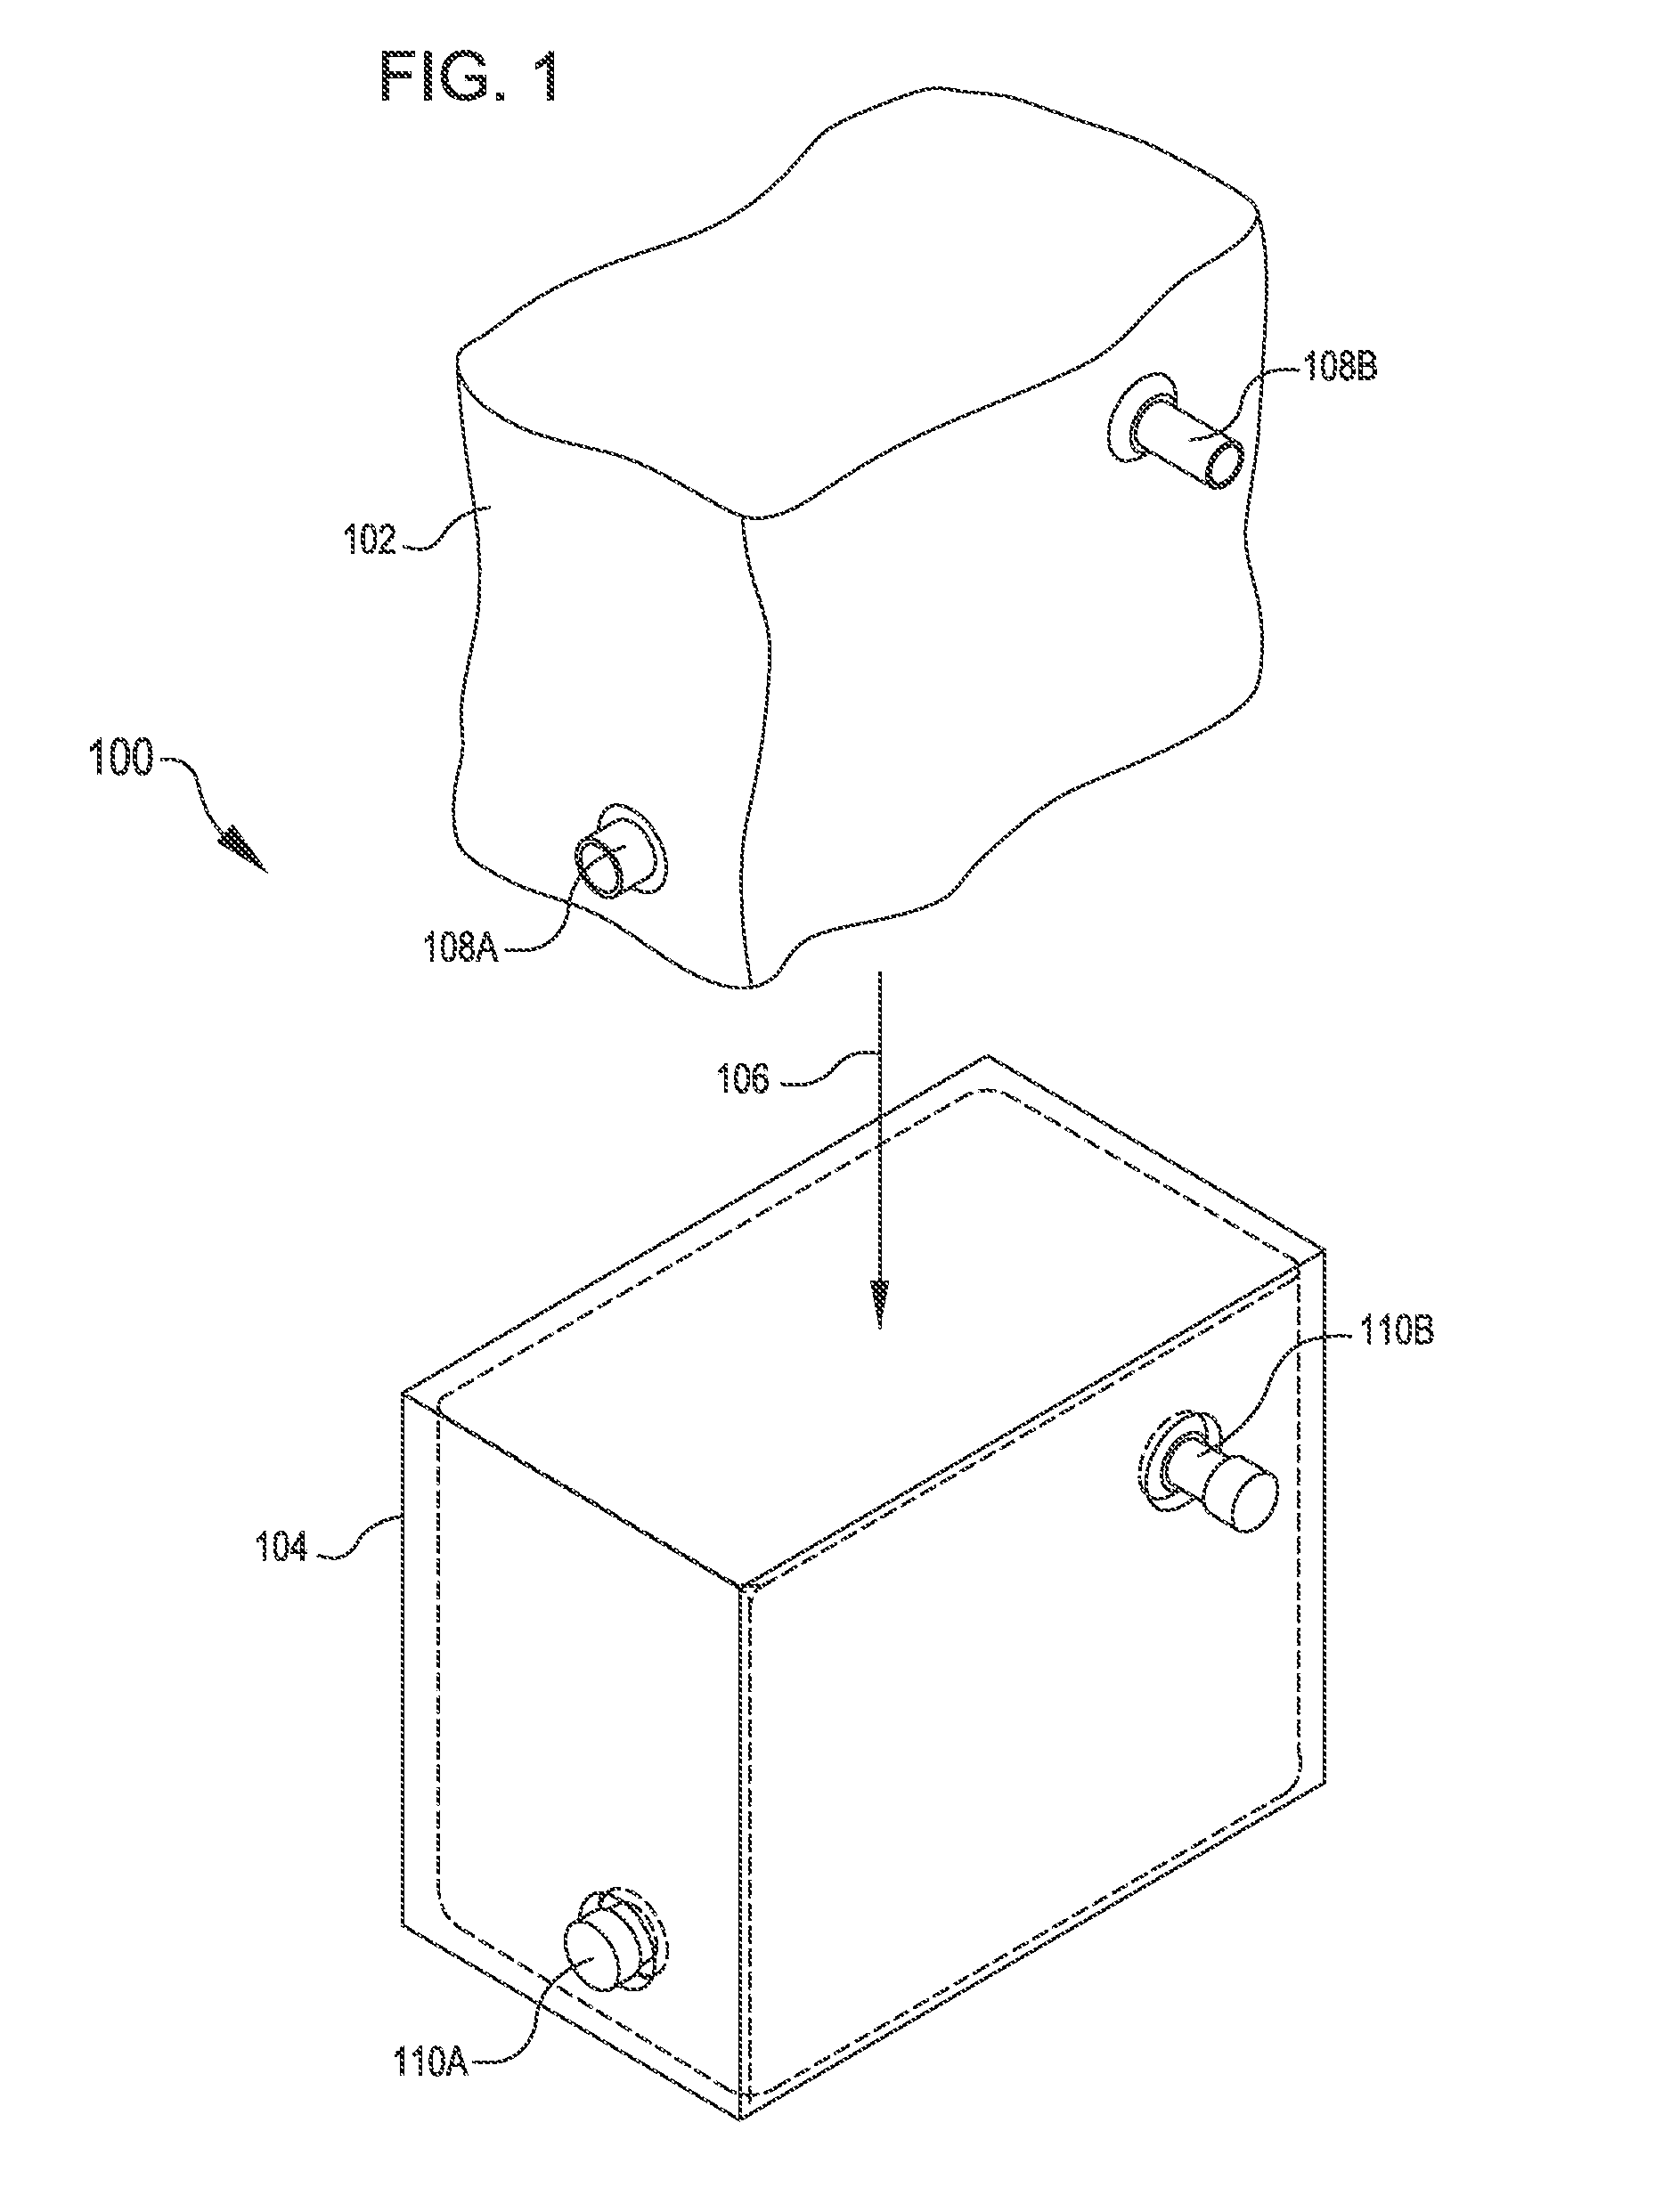 Aviation fuel tank with rigid wall for crash energy absorption